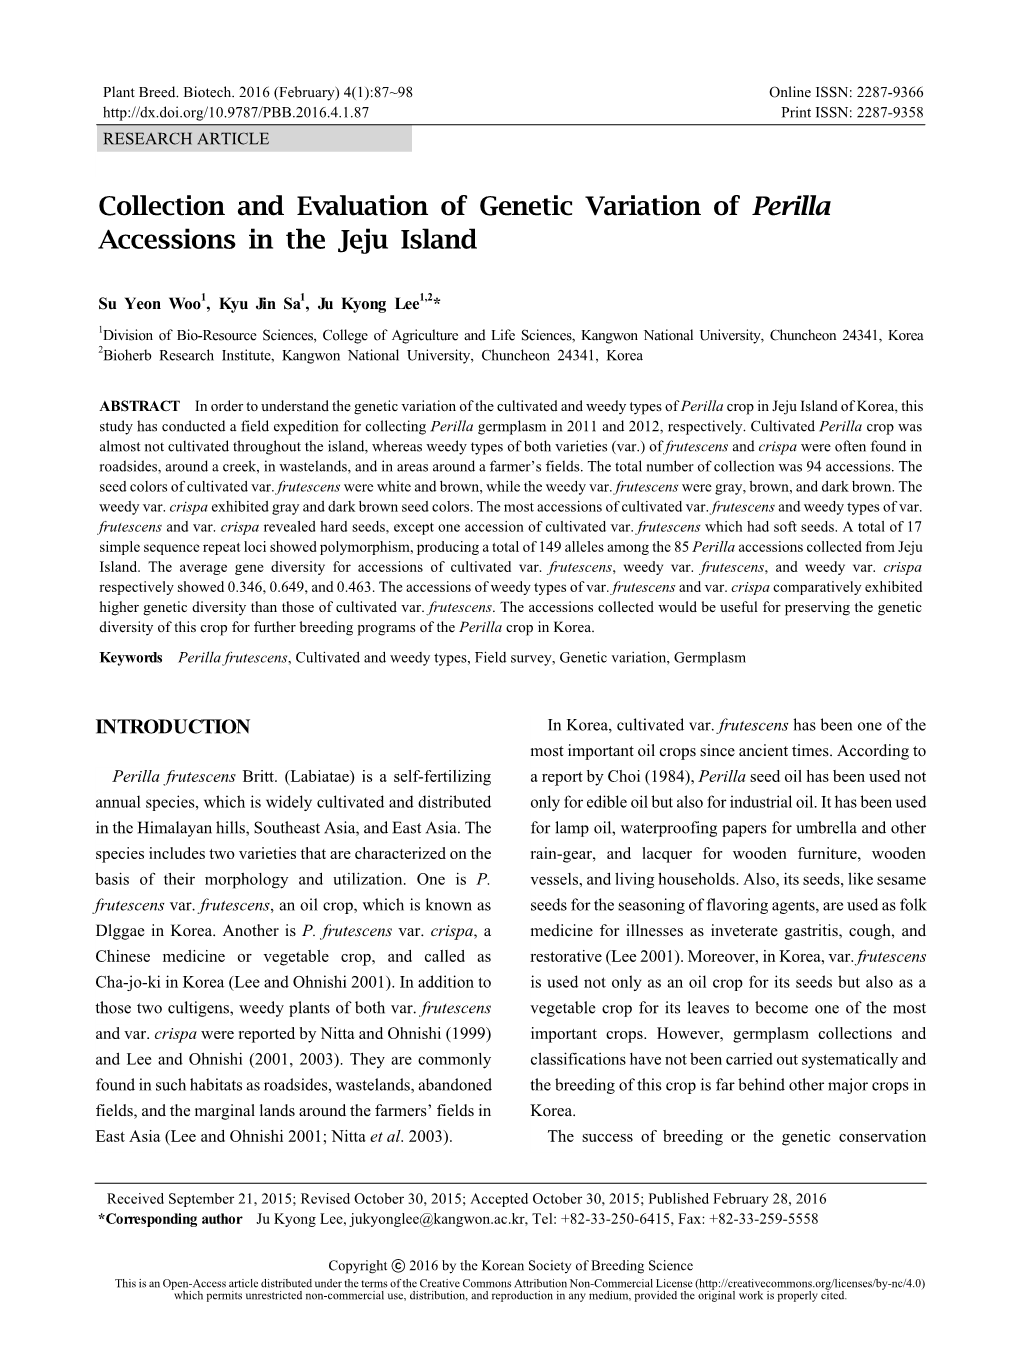 Collection and Evaluation of Genetic Variation of Perilla Accessions in the Jeju Island